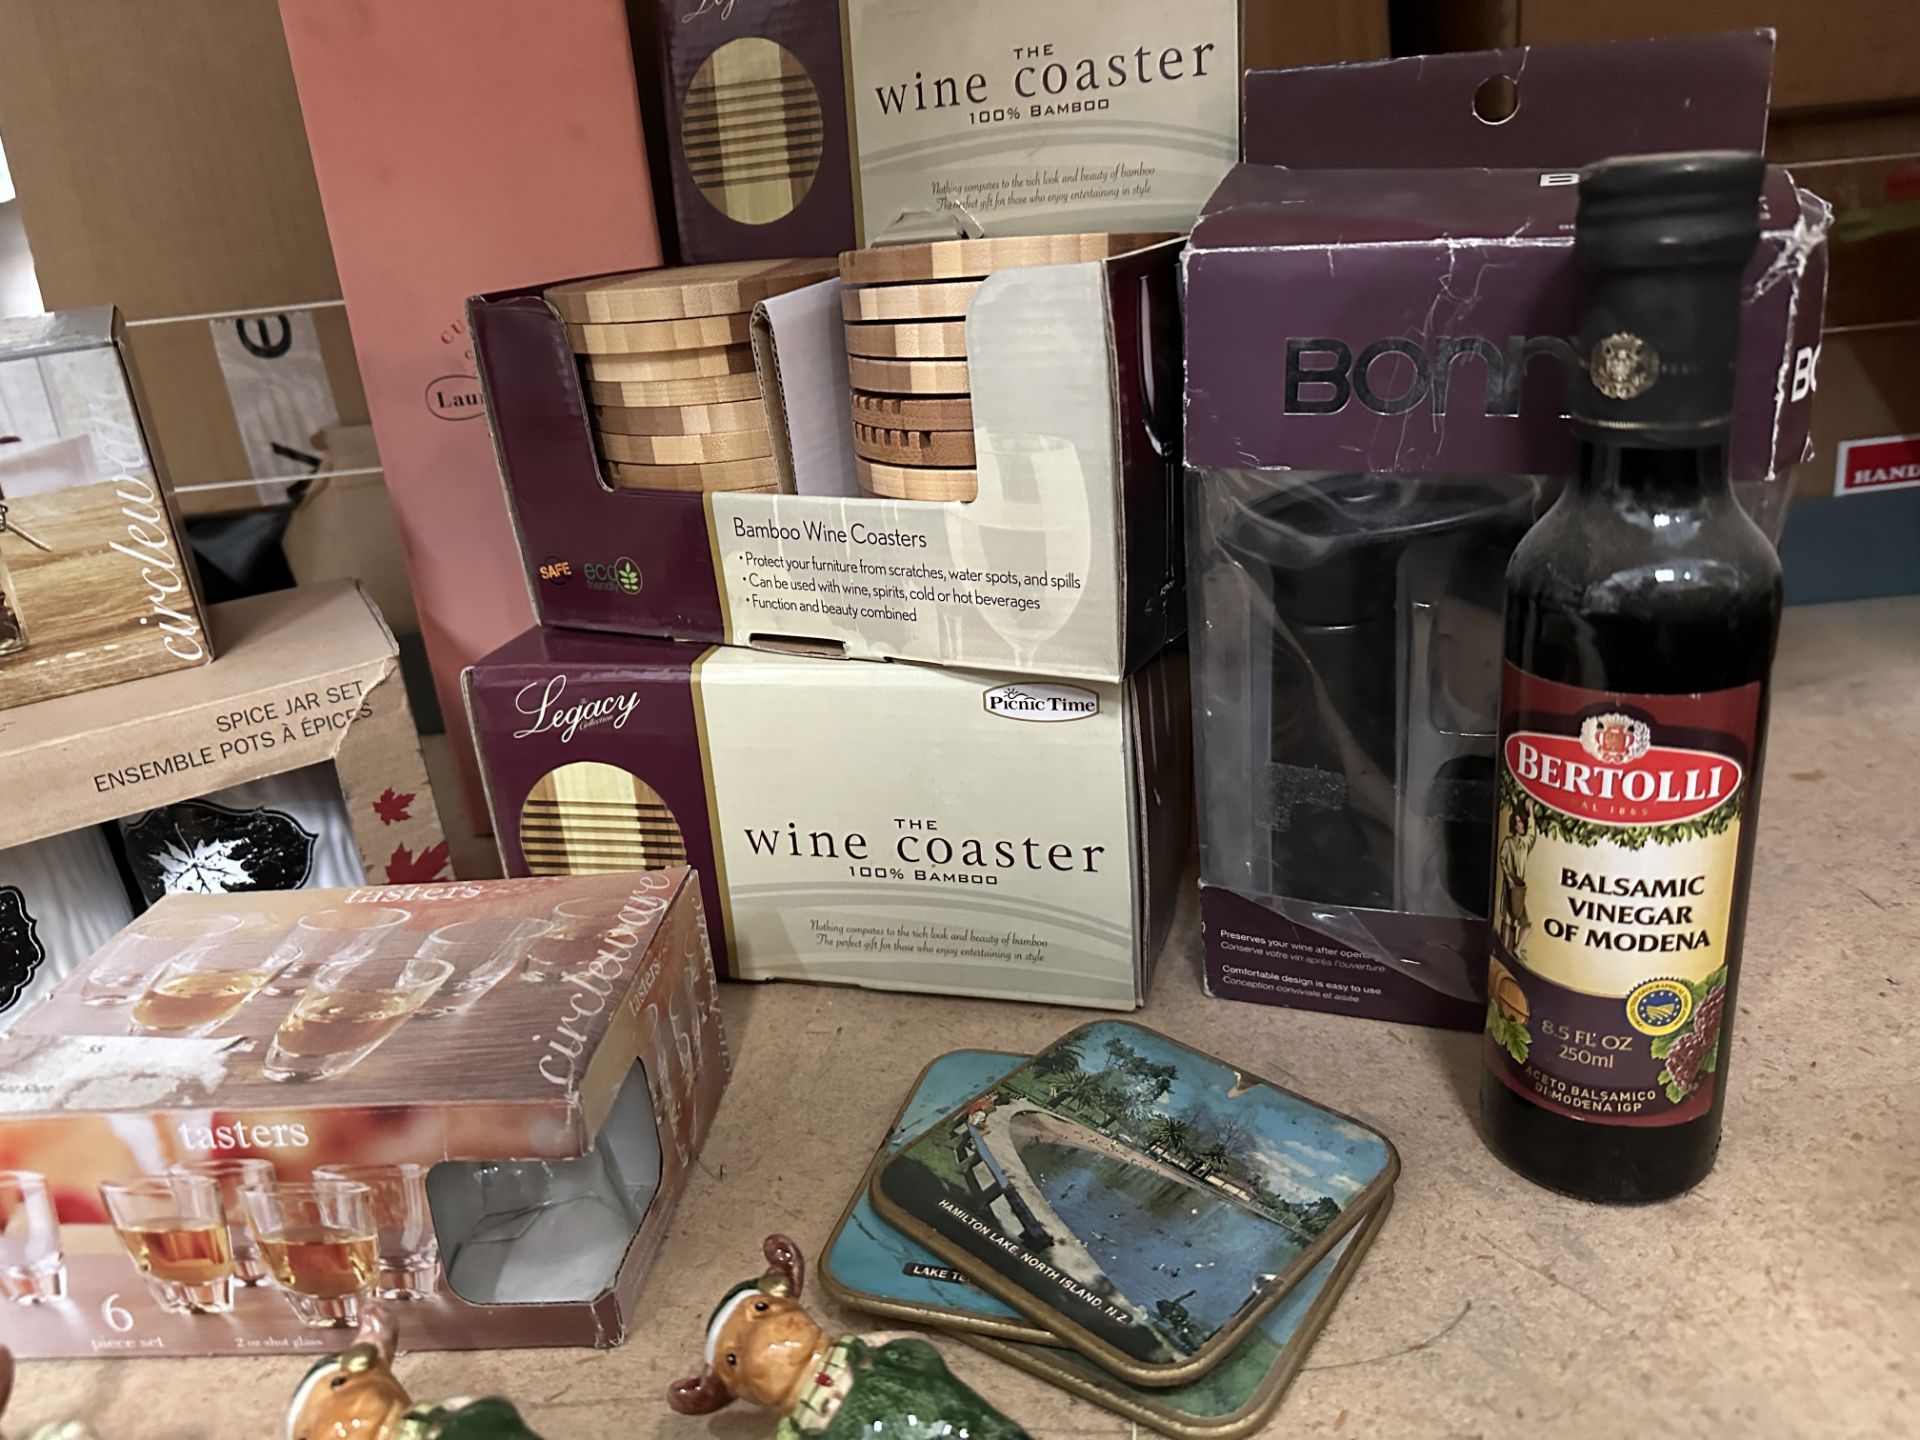 Mixed Lot of wine accessories, coasters, Rare box for wine, Harry and David accessories, ARA2 - Image 5 of 6